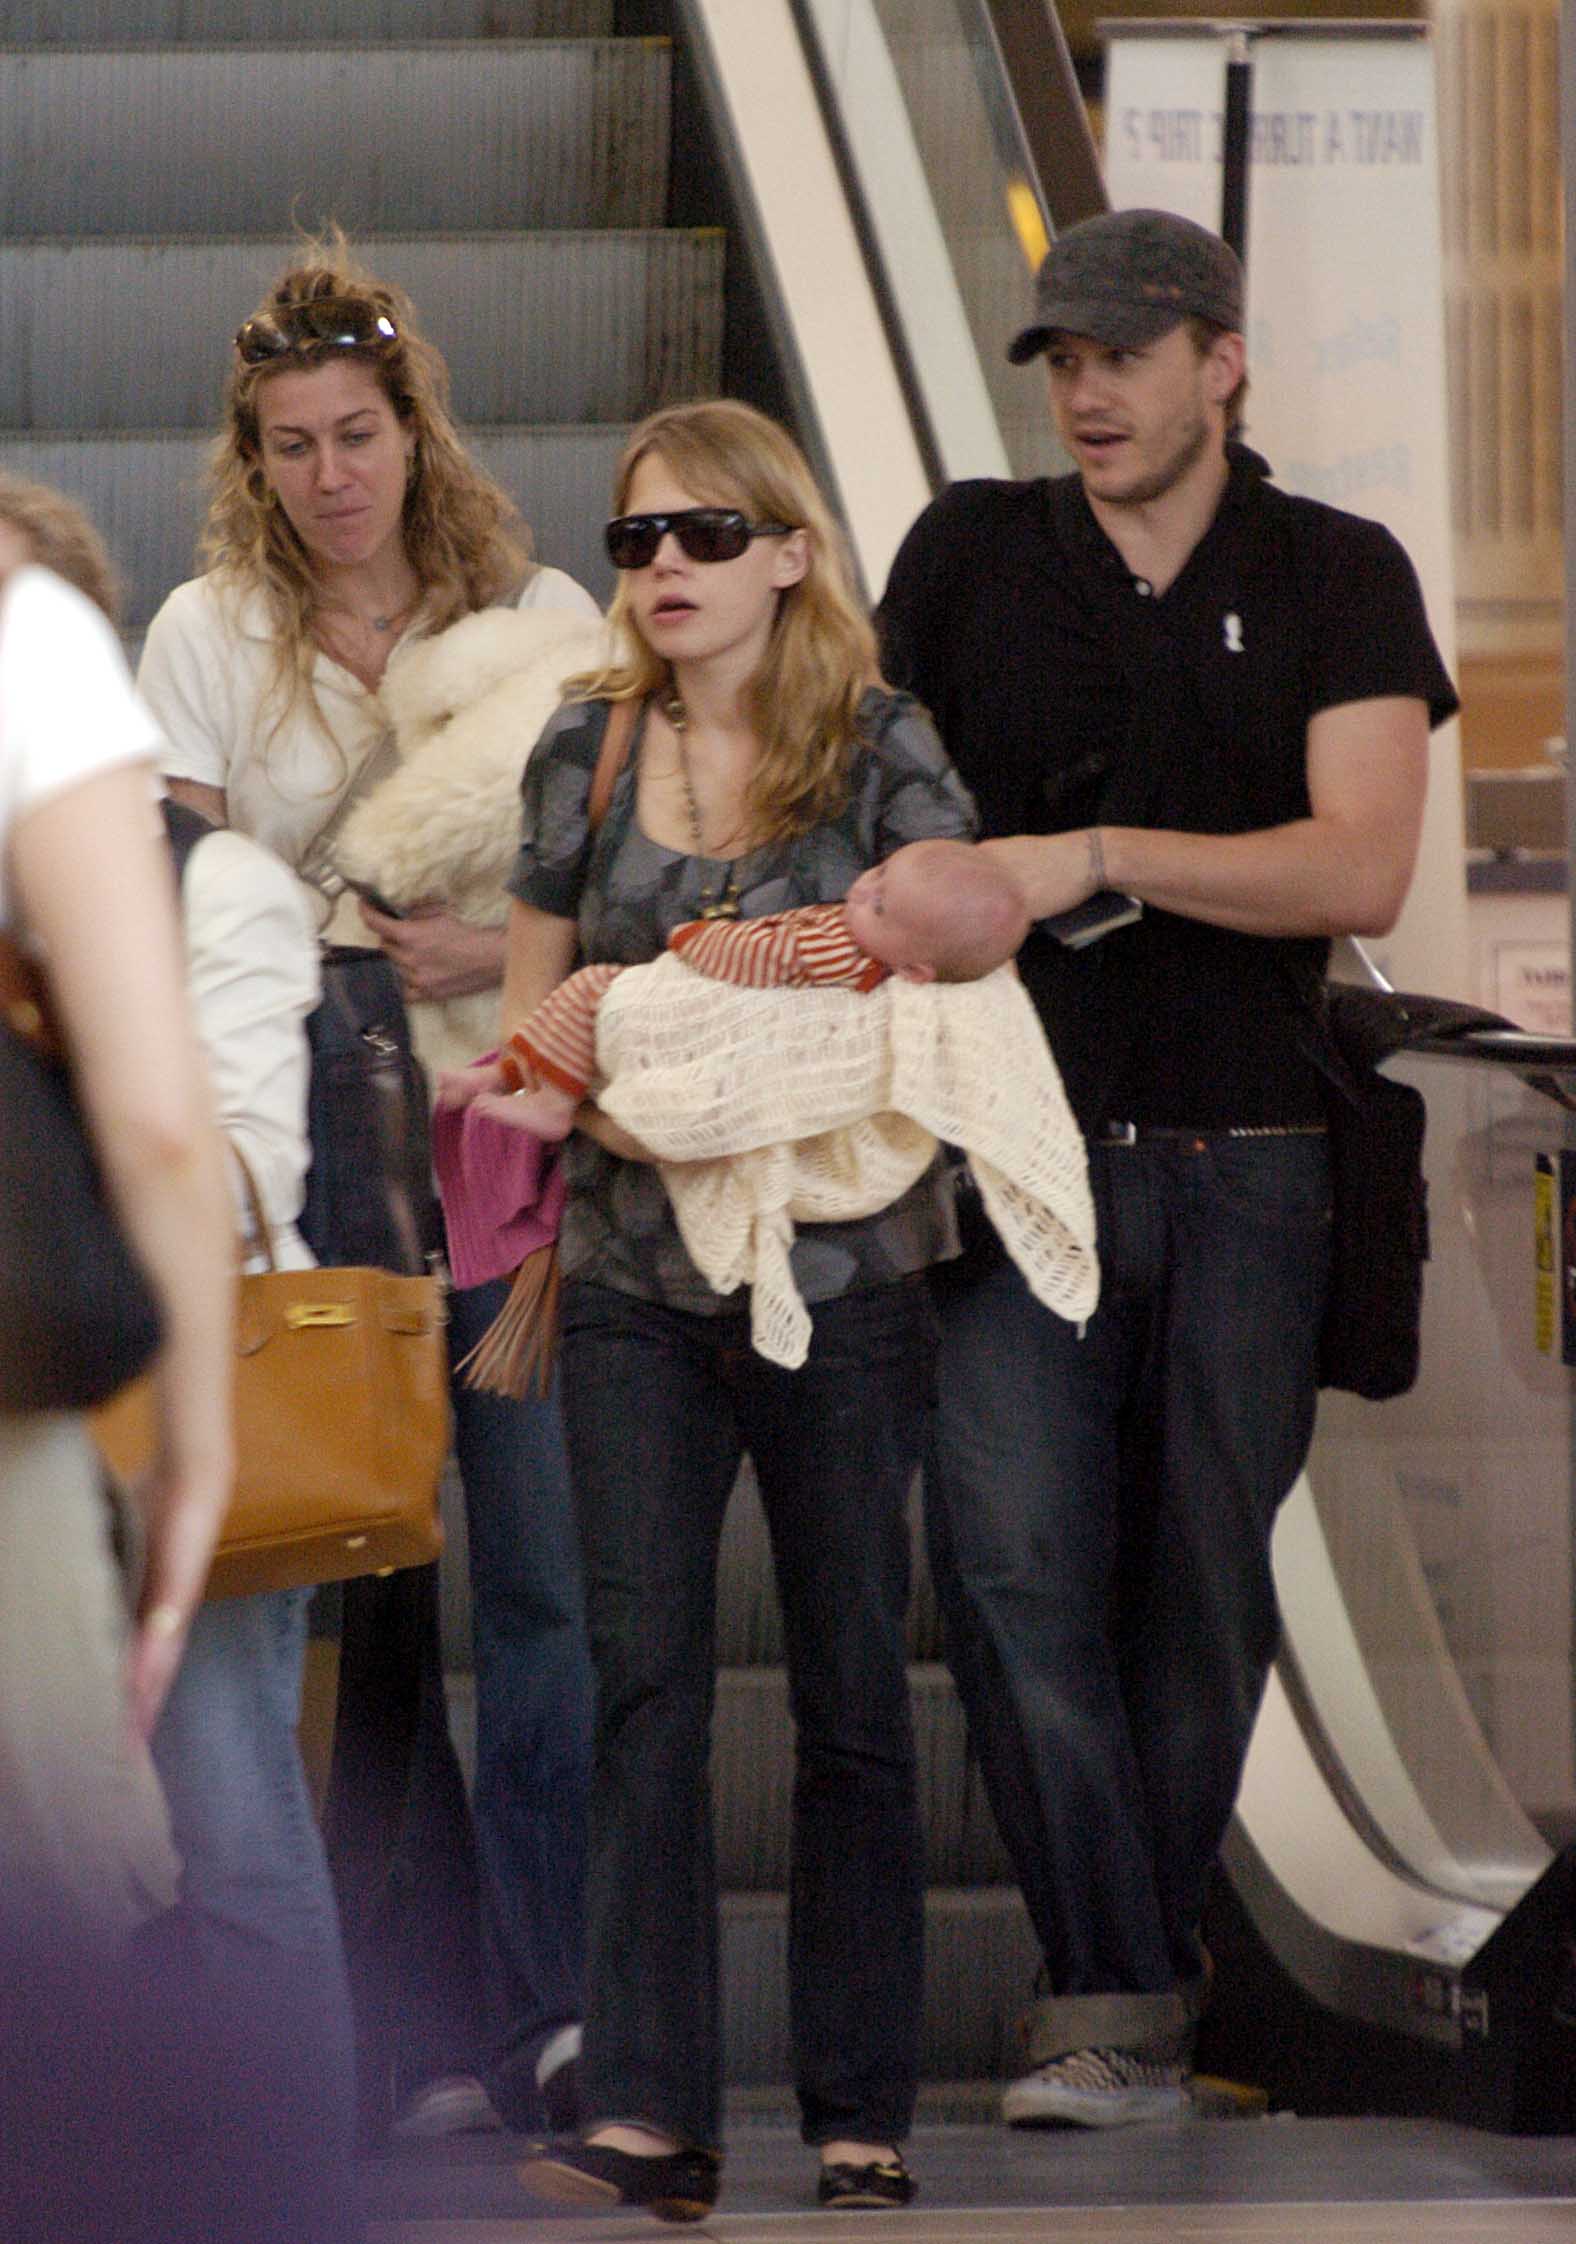 Actor Heath Ledger with wife Michelle Williams and daughter Matilda Rose Ledger leave Sydney International Airport for their New York home on January 14, 2006 in Sydney, Australia. | Source: Getty Images